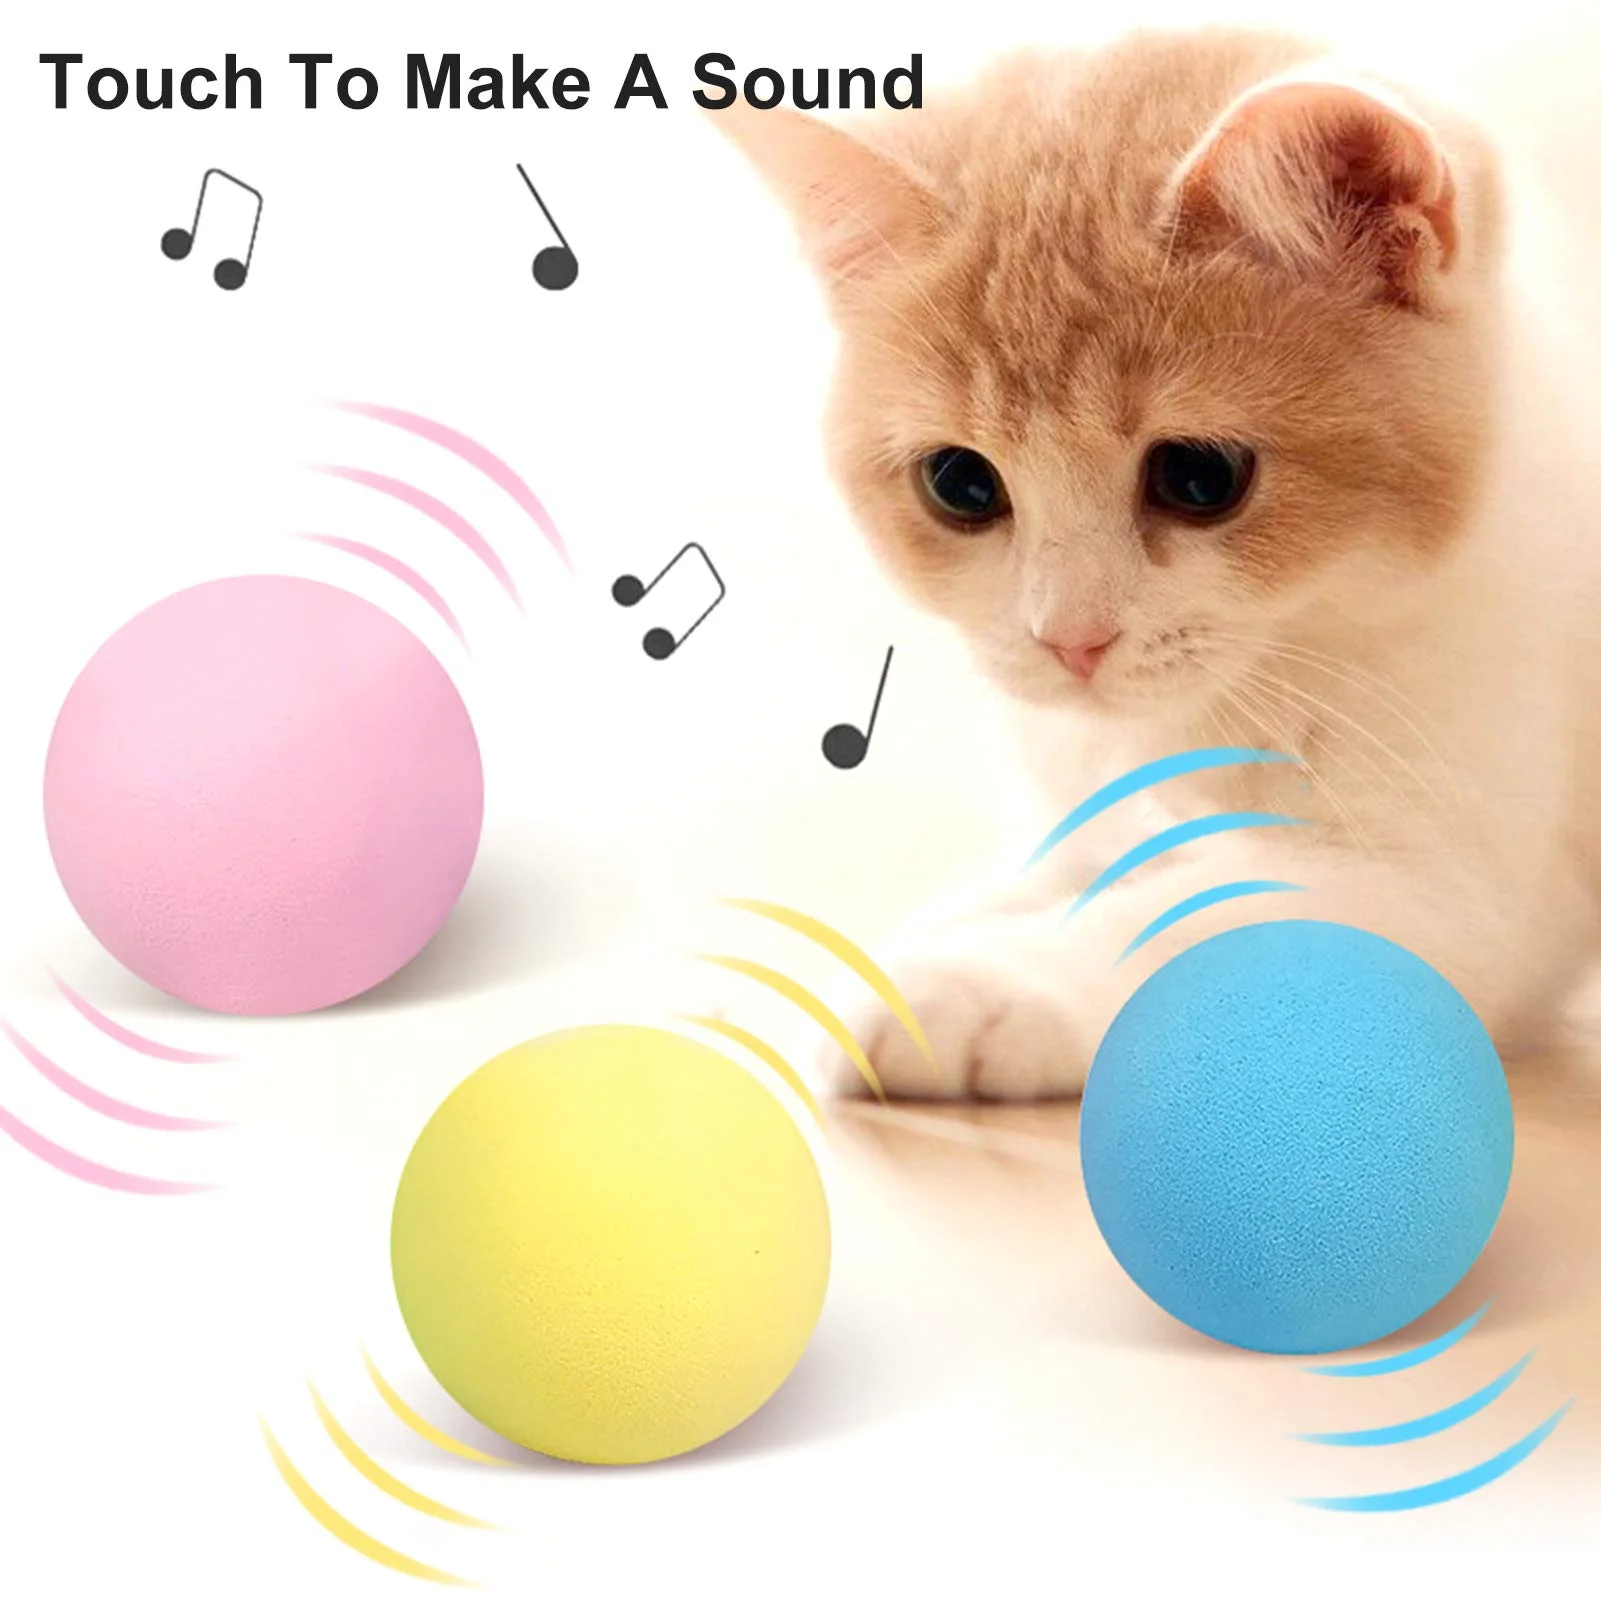 

Interactive Cat Toys Animal Sounds Catnip Training Toy Ball Pet Squeaky Ball For Kitten Cat Novelty Toy